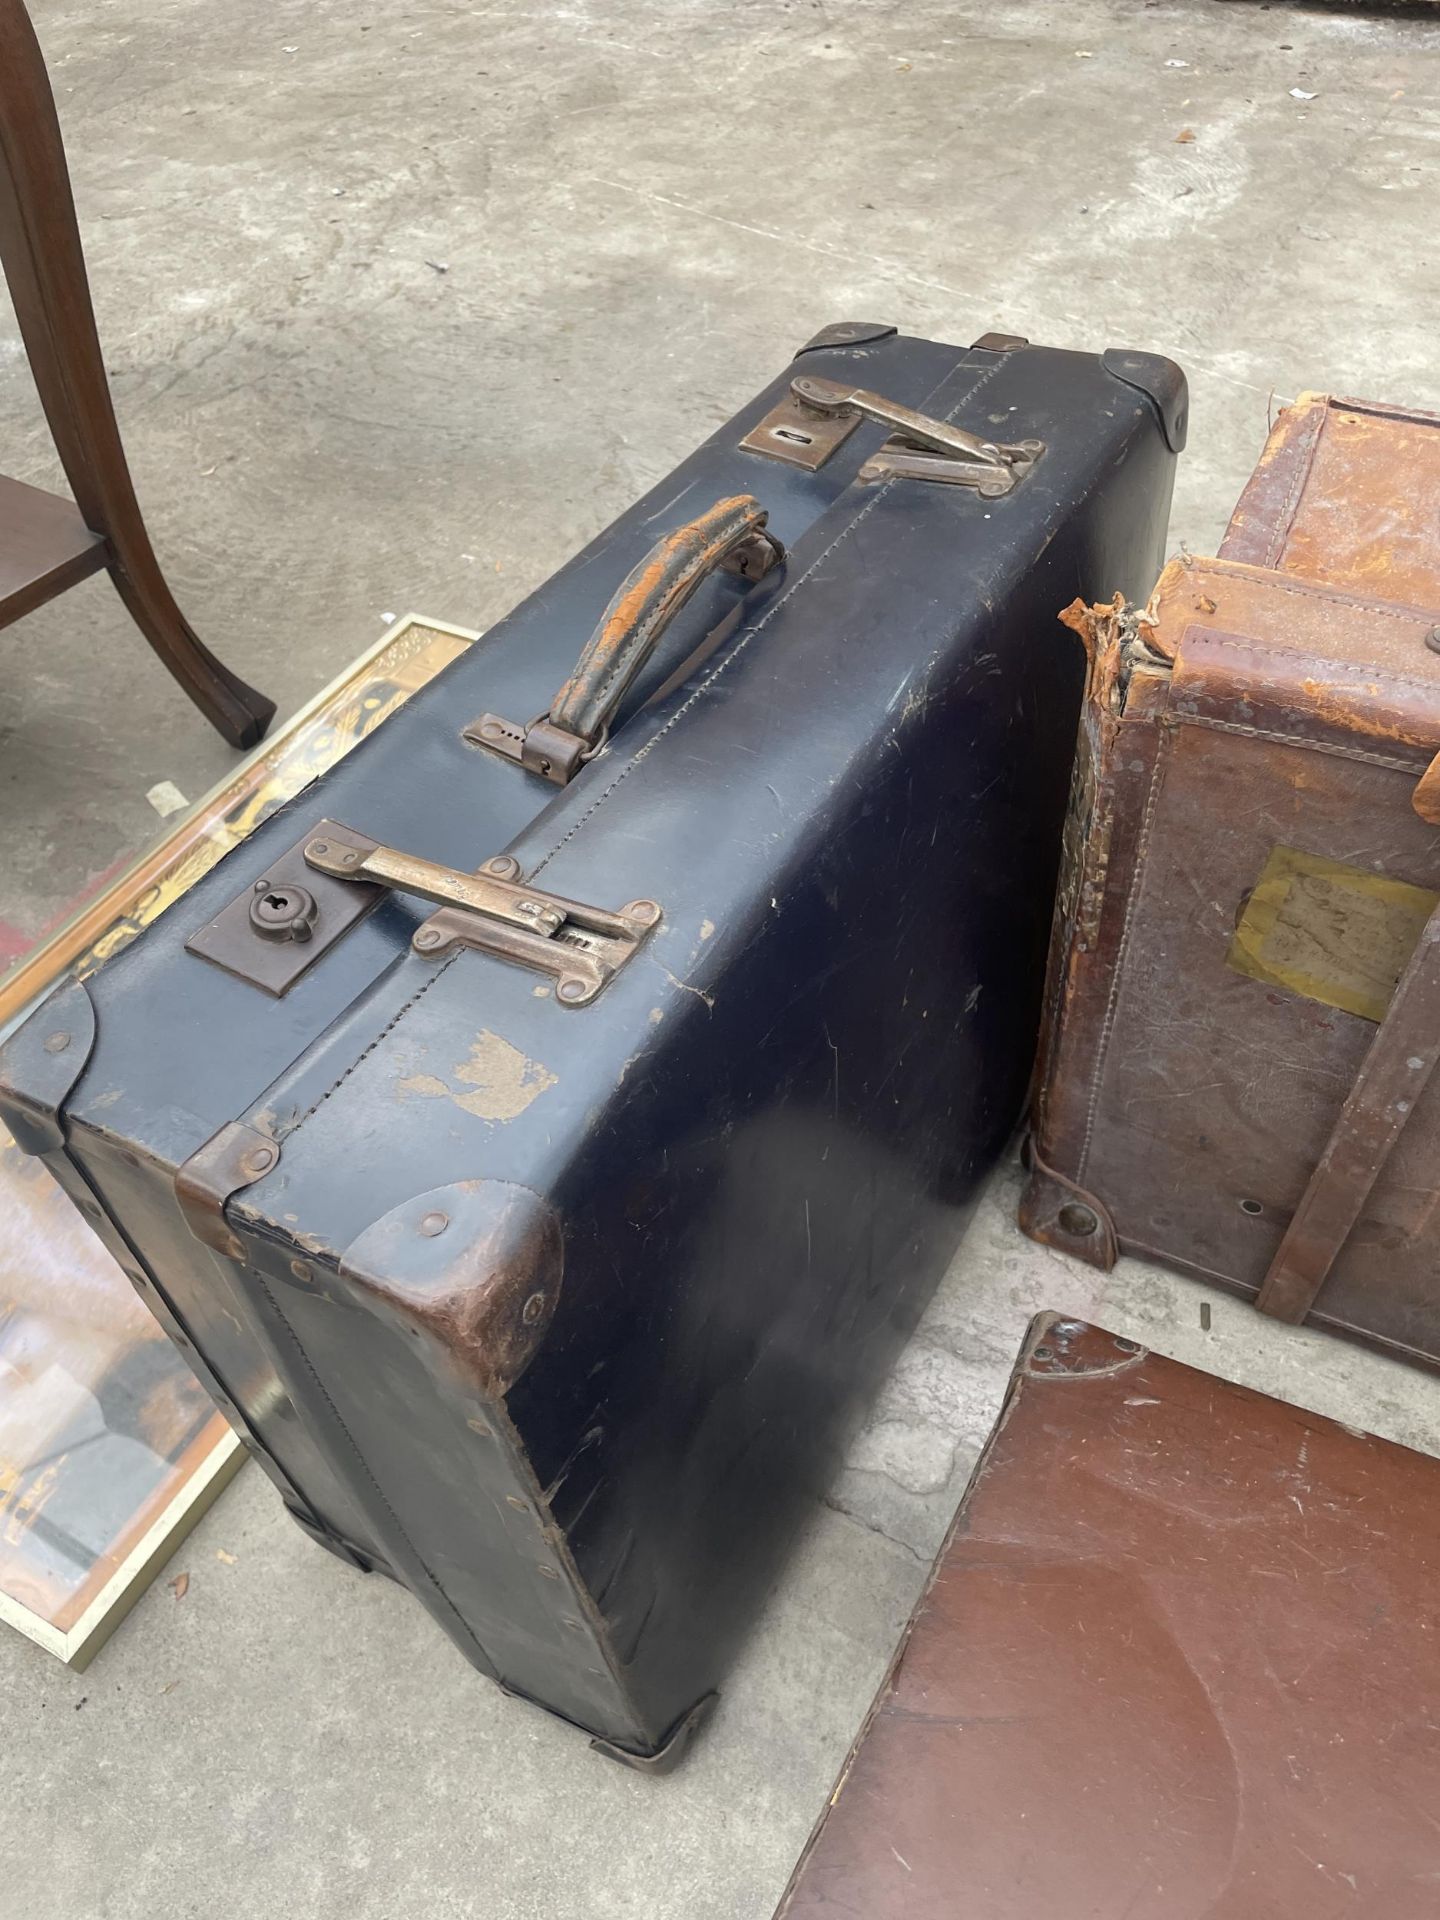 A KELVIN SUITCASE, LEATHER SUITCASE AND OTHER CASE AND PRINT - Image 3 of 4